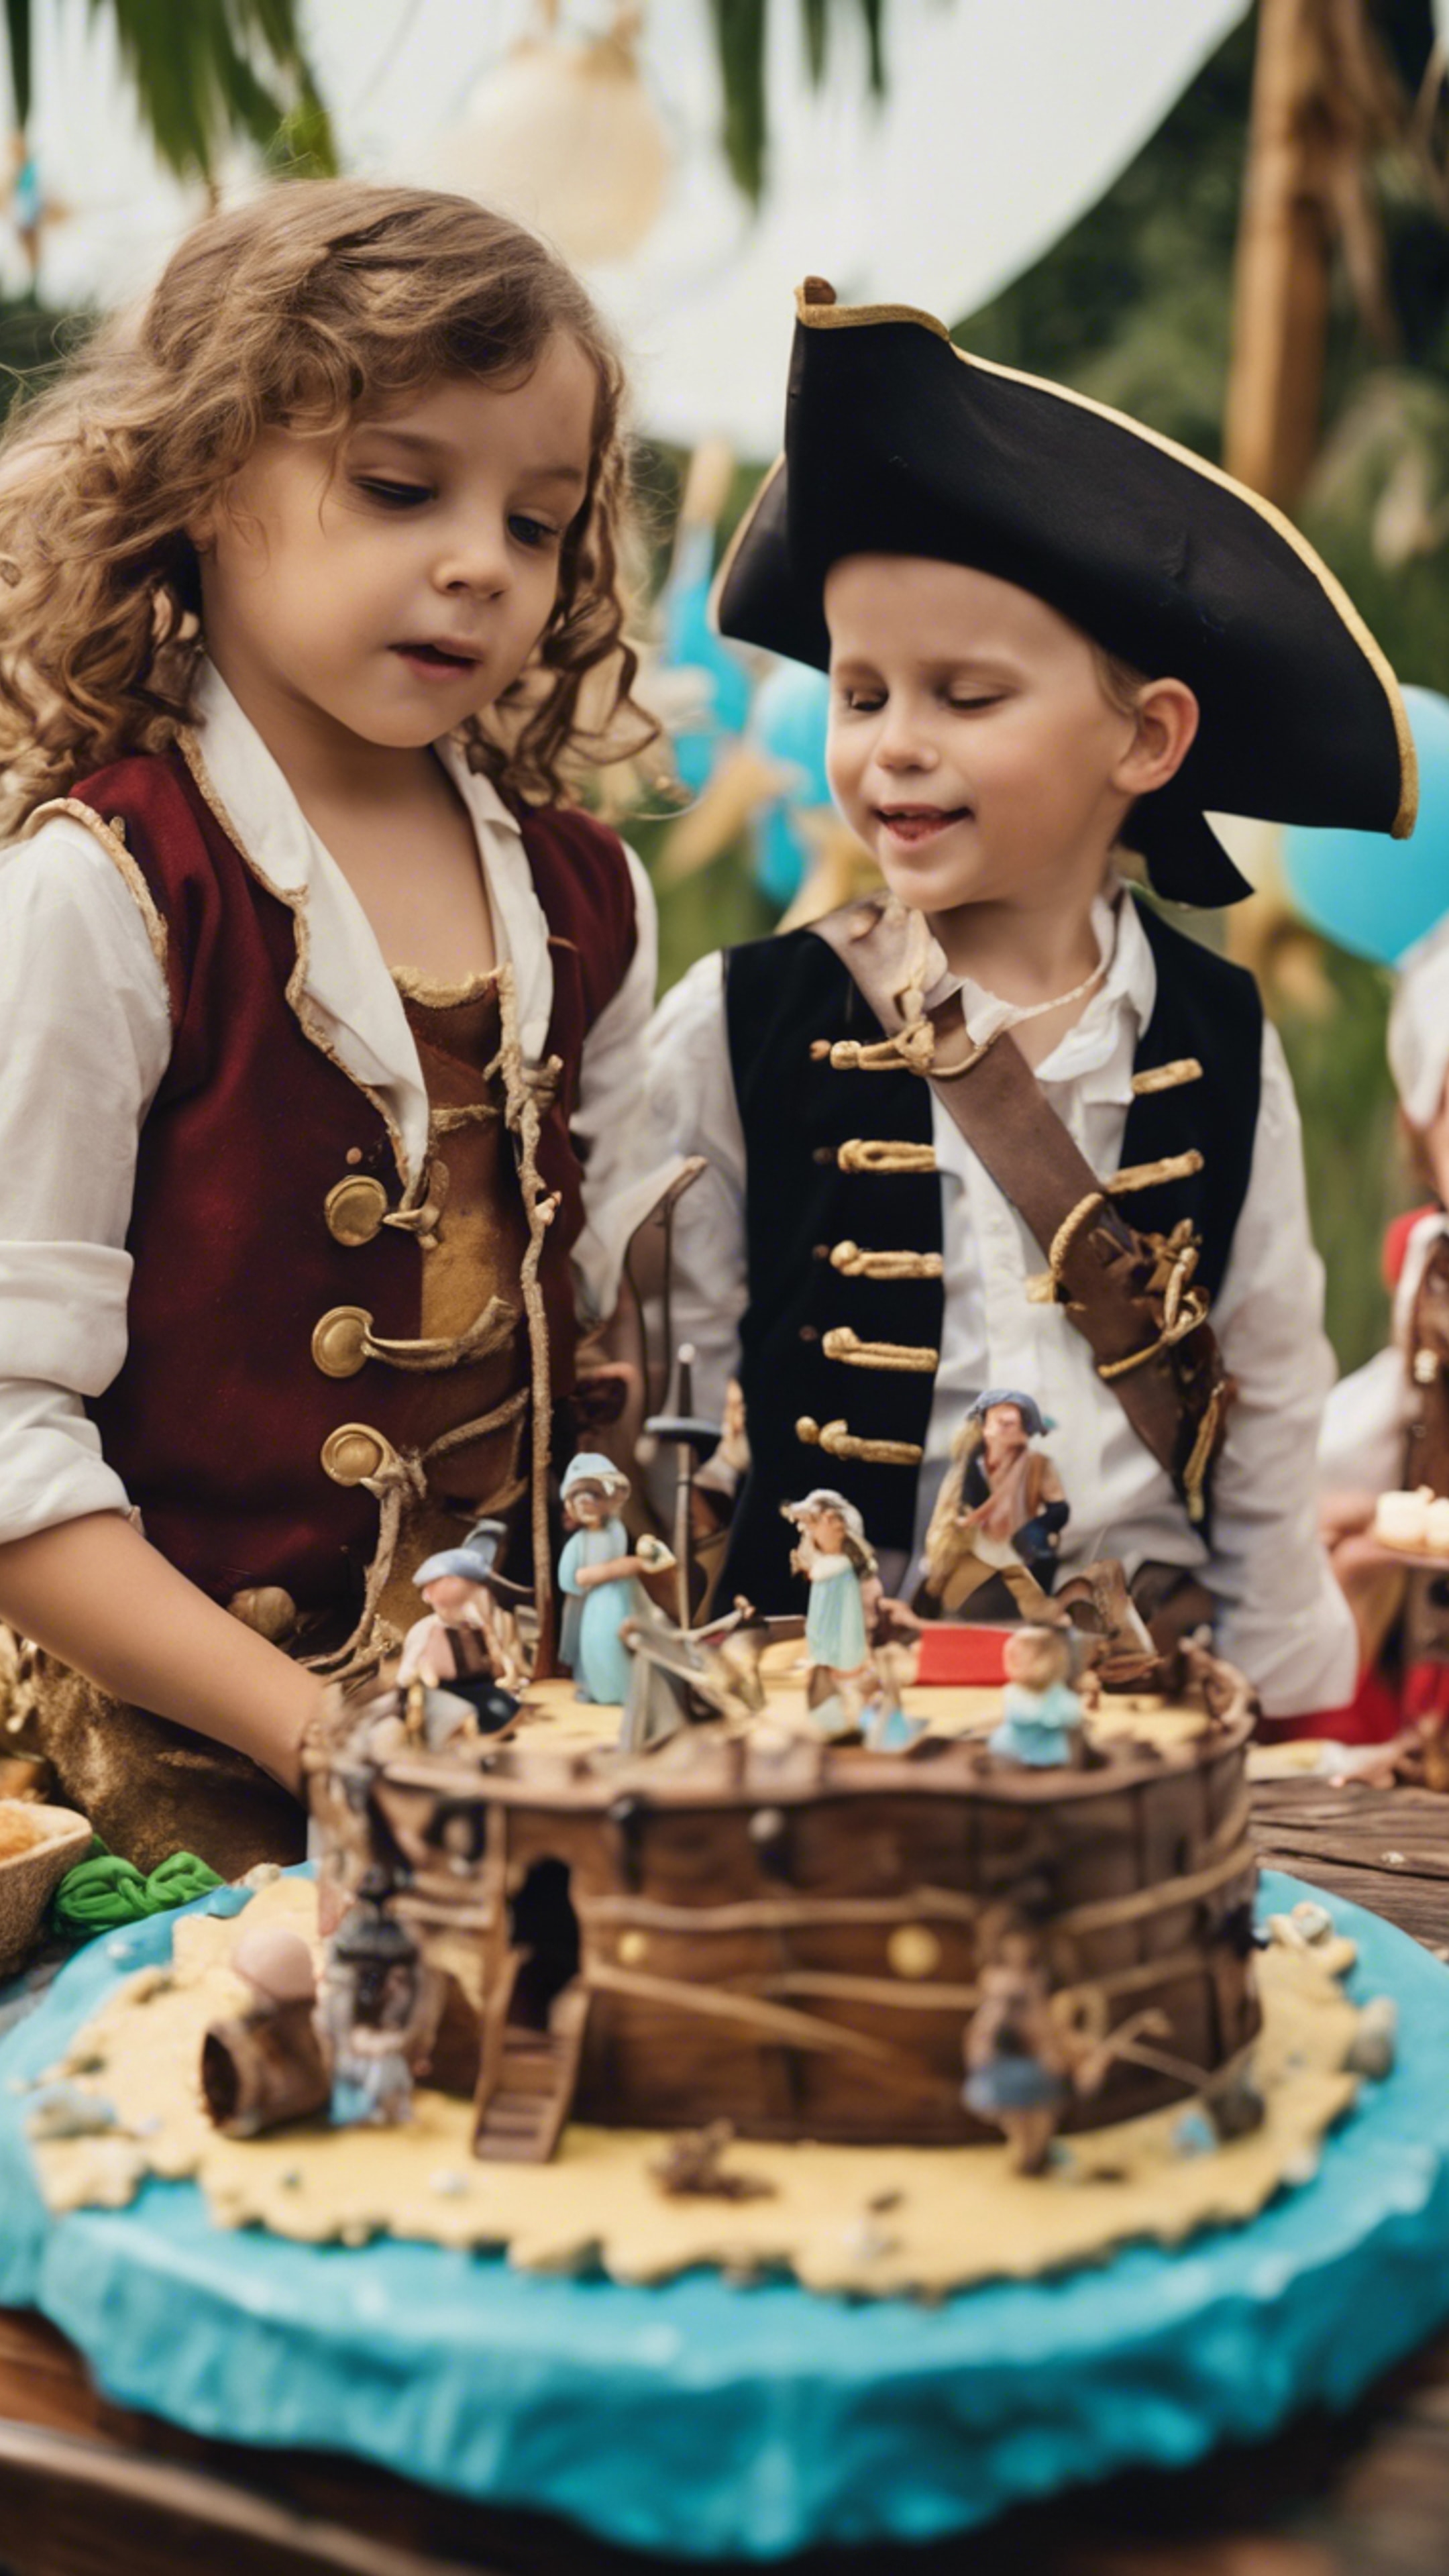 Children's pirate-themed birthday party with a treasure map, pirate ship cake and kids dressed as pirates. Fondo de pantalla[fc1a6e05b86643309d7a]